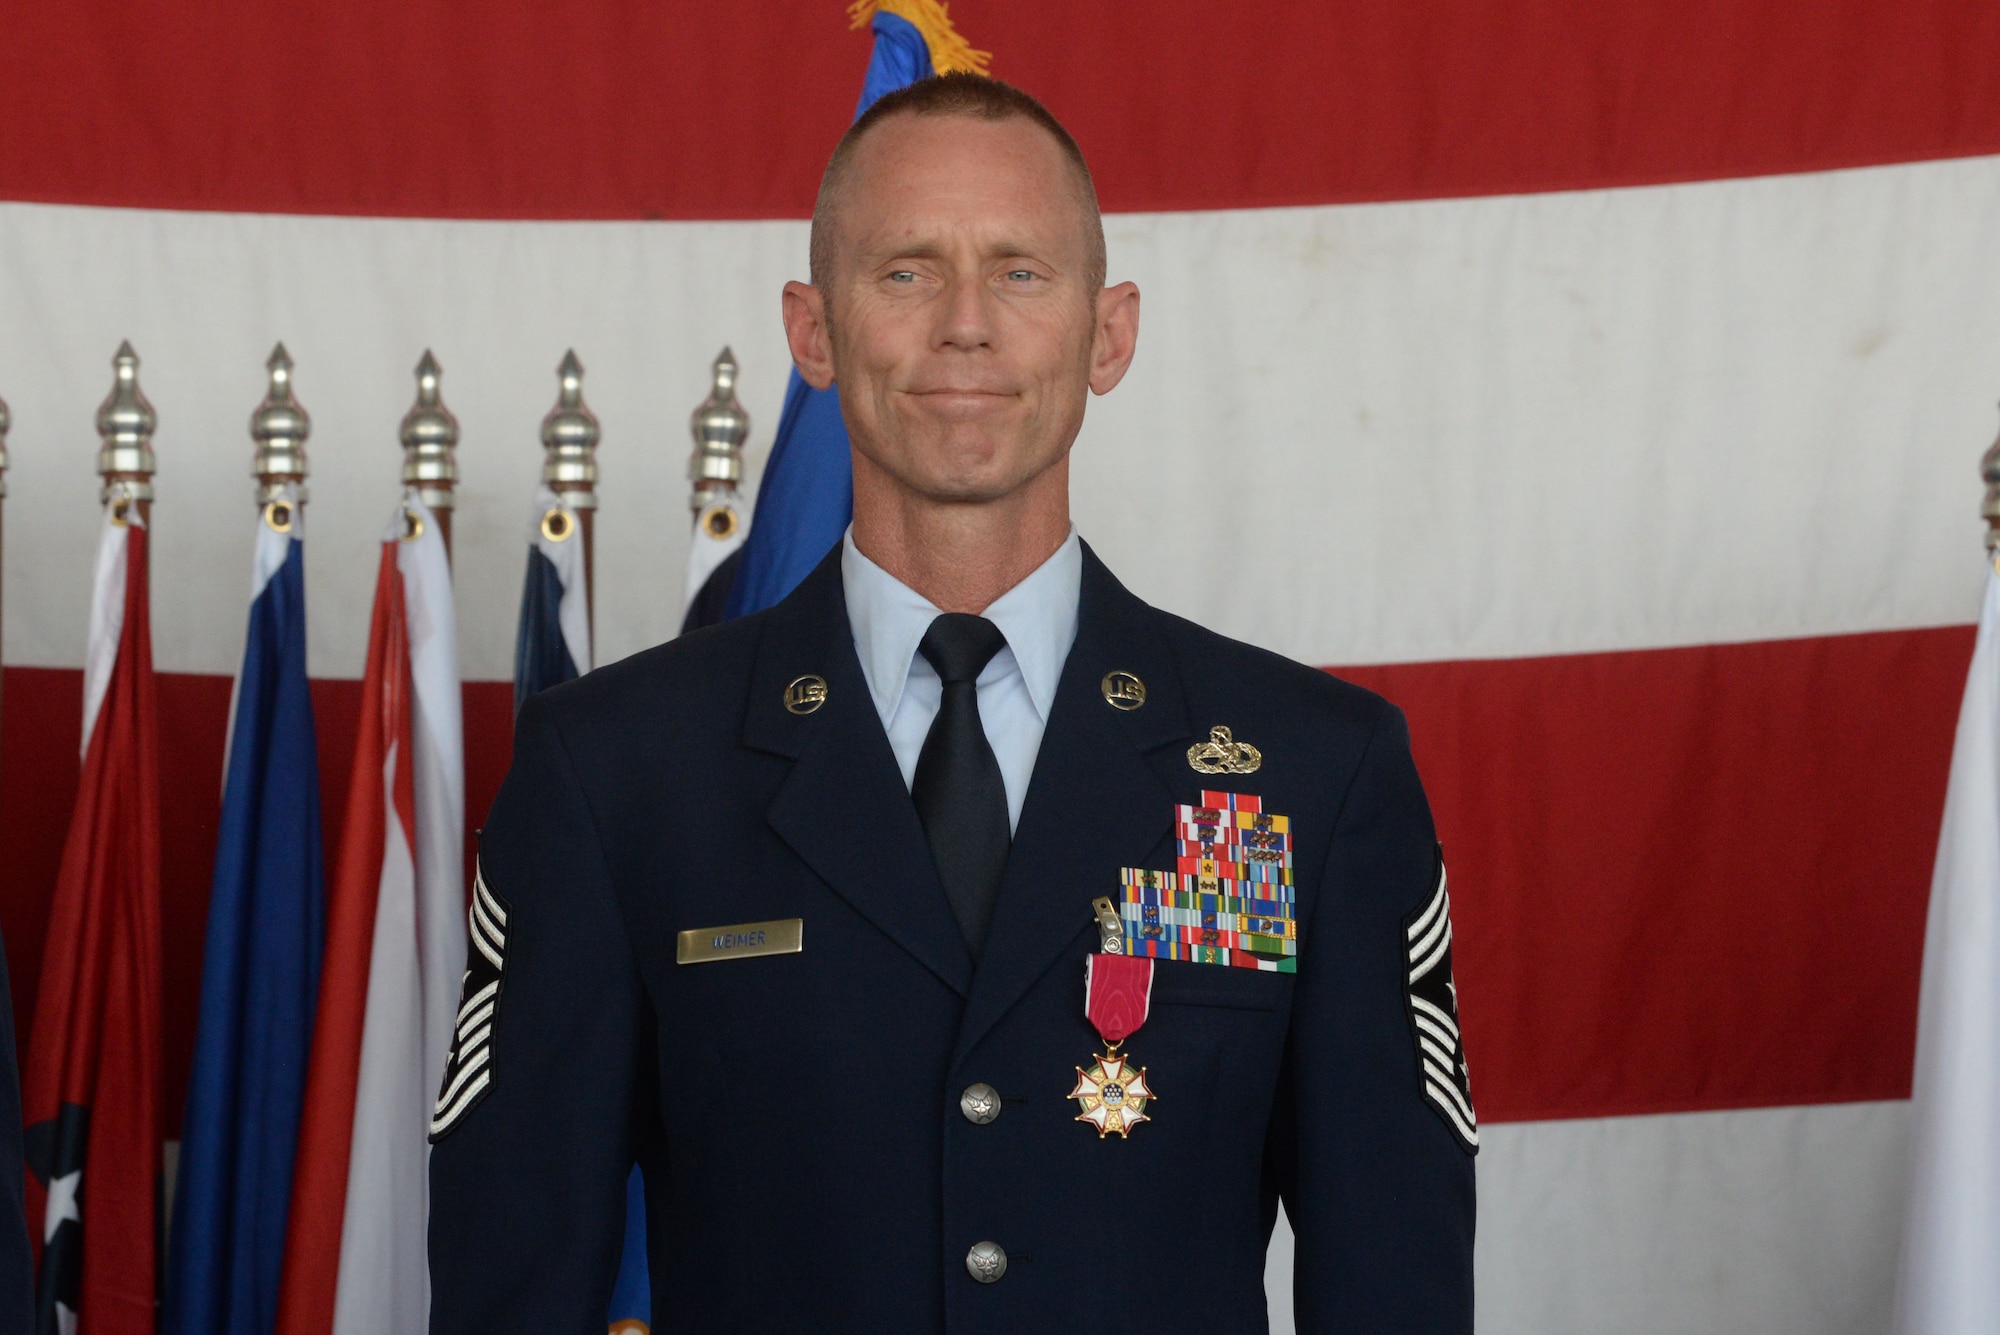 Chief Master Sgt. Geoff Weimer smiles as he is officially relieved from active duty at his retirement ceremony at Minot Air Force Base, N.D., June 24, 2016. Weimer served as the command chief of the 5th Bomb Wing since July 2014. (U.S. Air Force photo/Airman 1st Class Jessica Weissman)